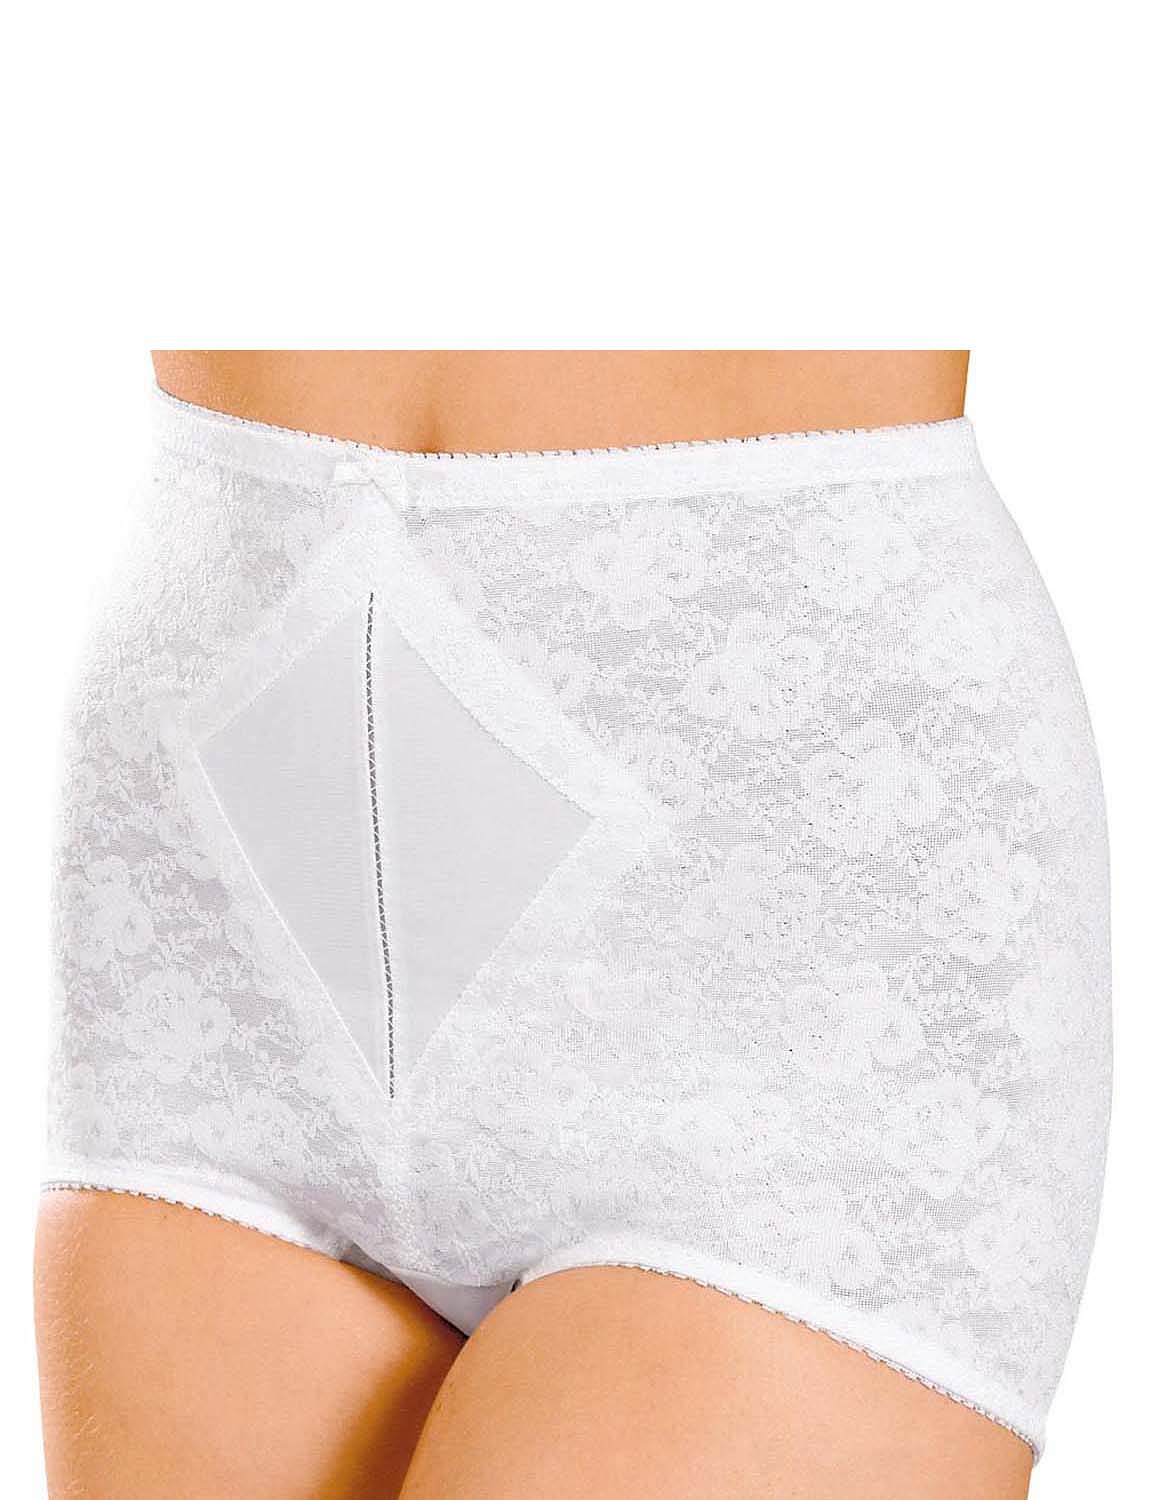 Naturana Womens Firm Control Panty Girdle Shaping Knickers